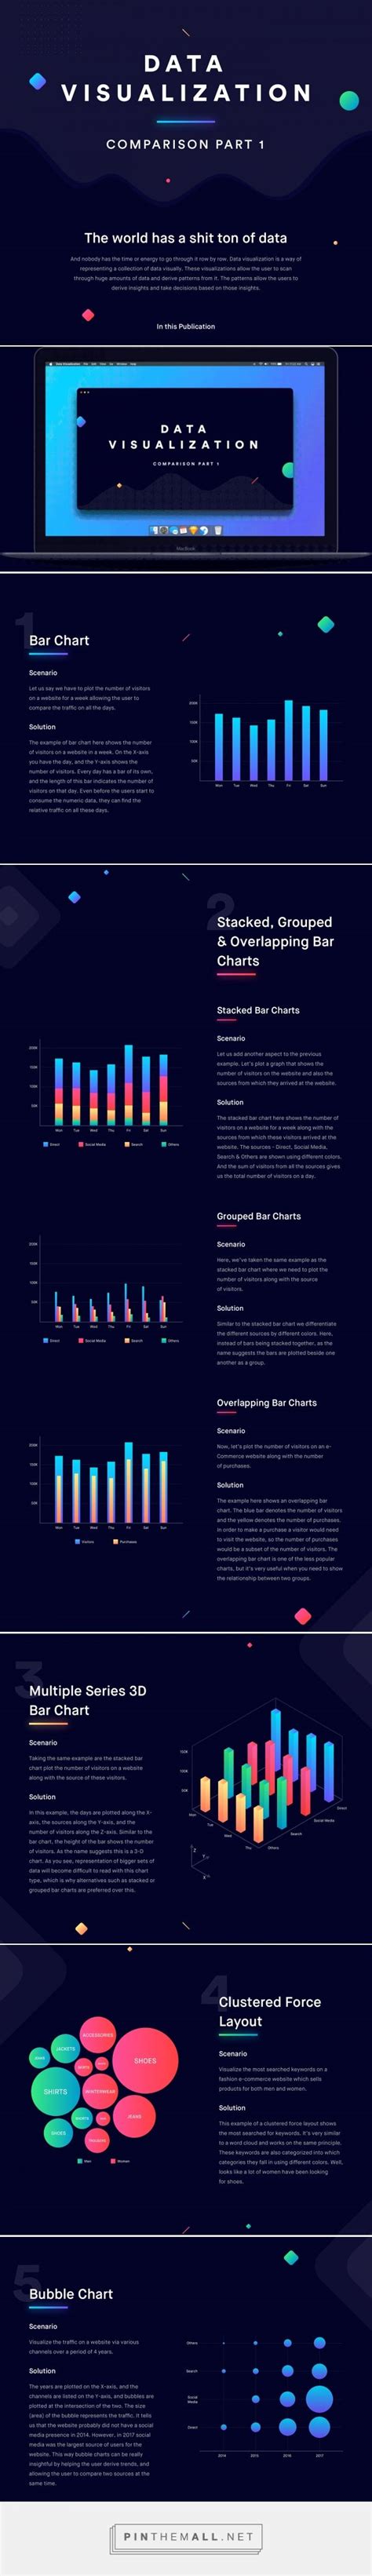 Guide To Data Visualization Comparison Part 1 On Behance A